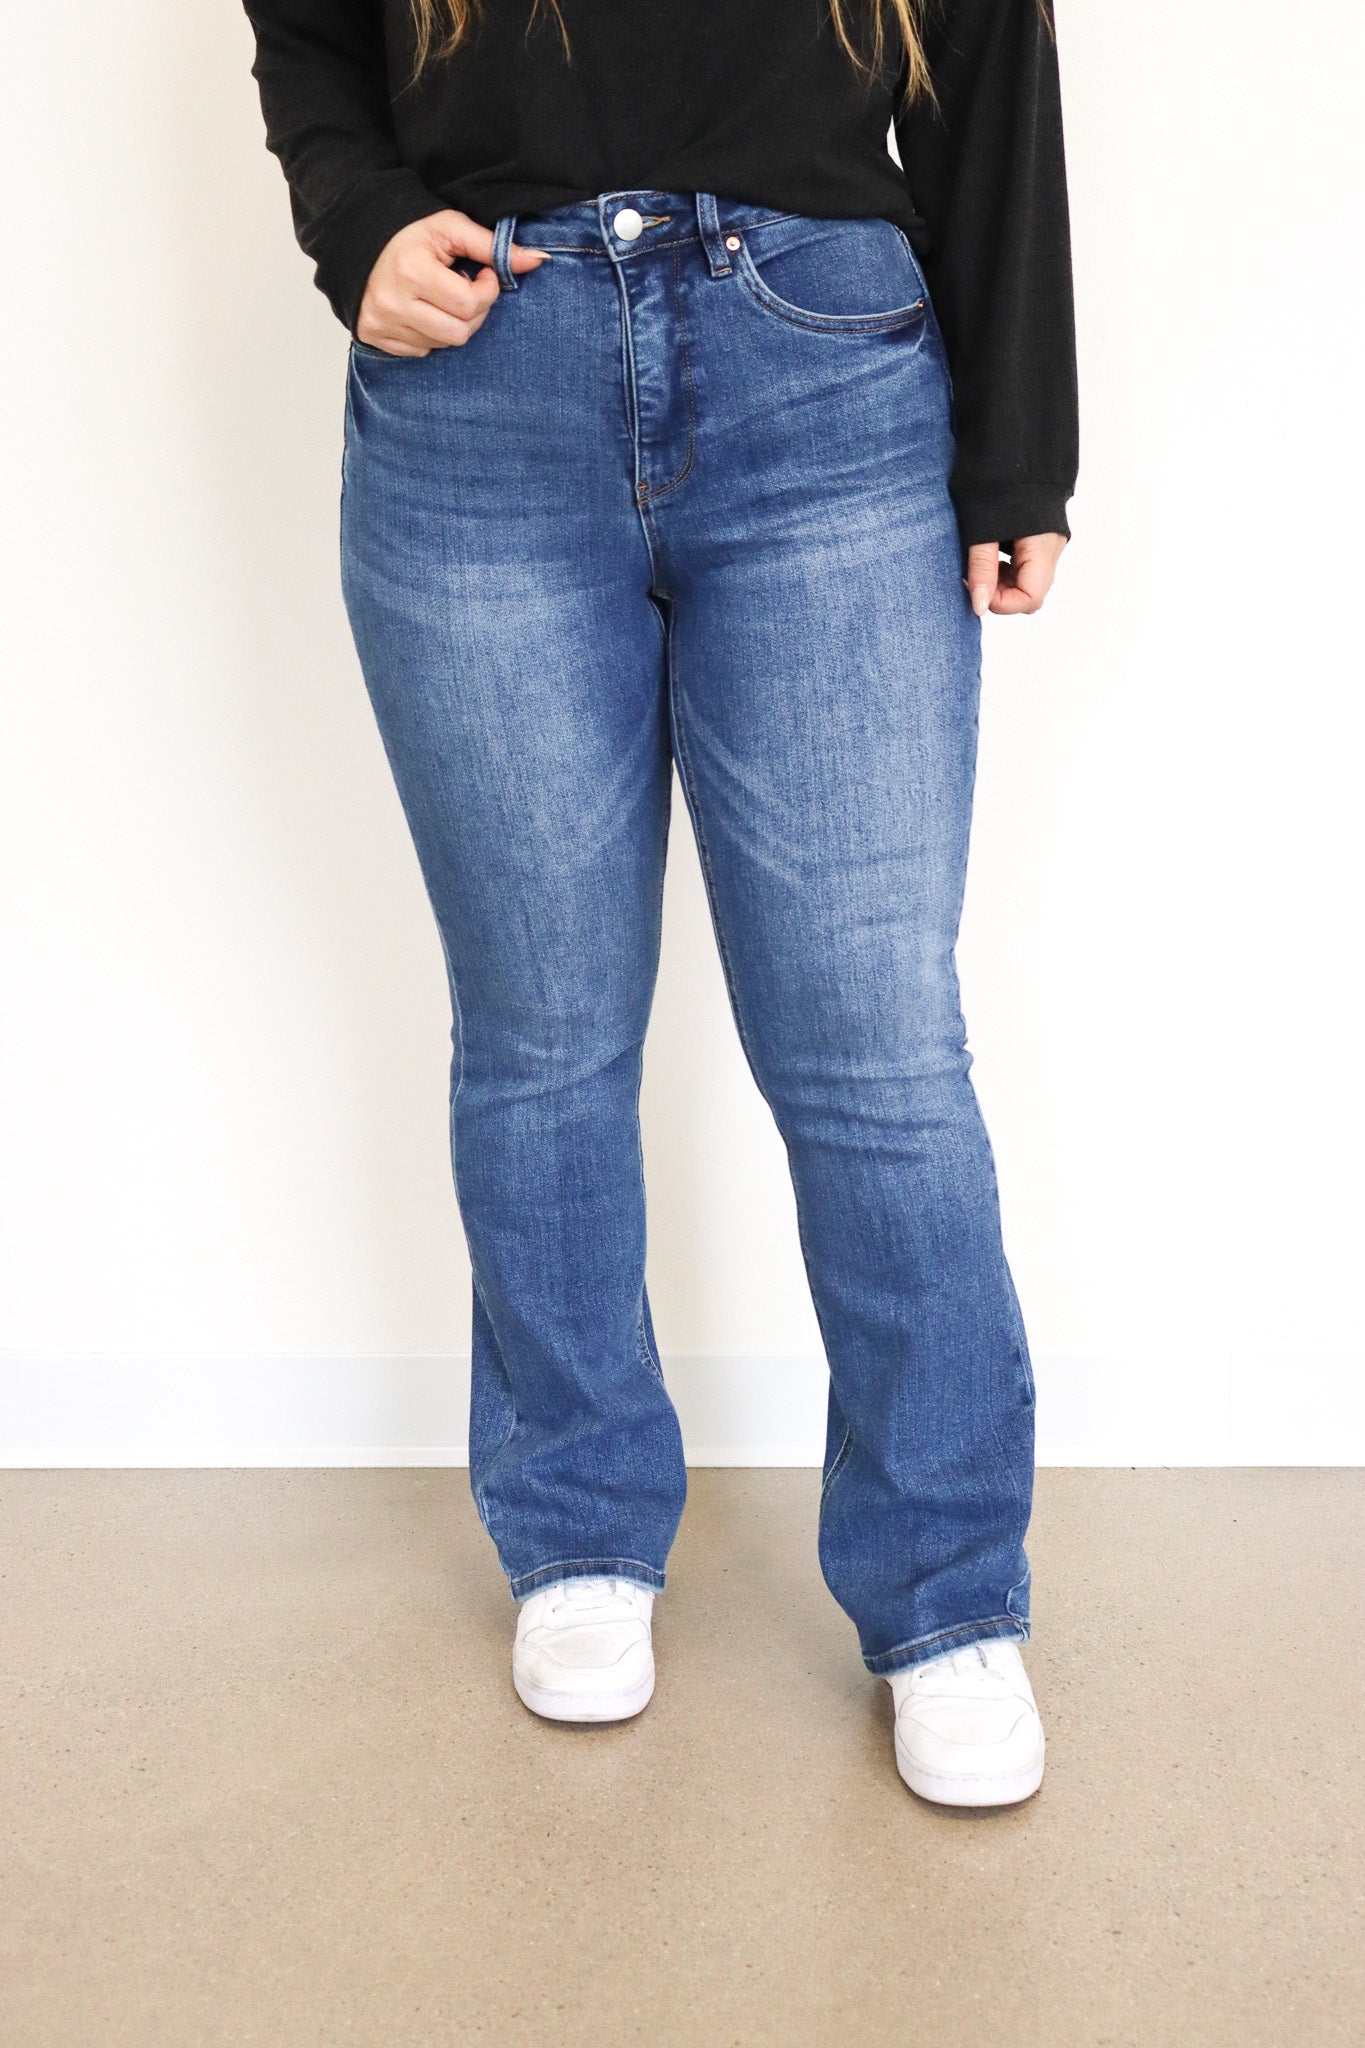 The new RFM tummy control jeans are so incredible! #tummycontrol #tryo